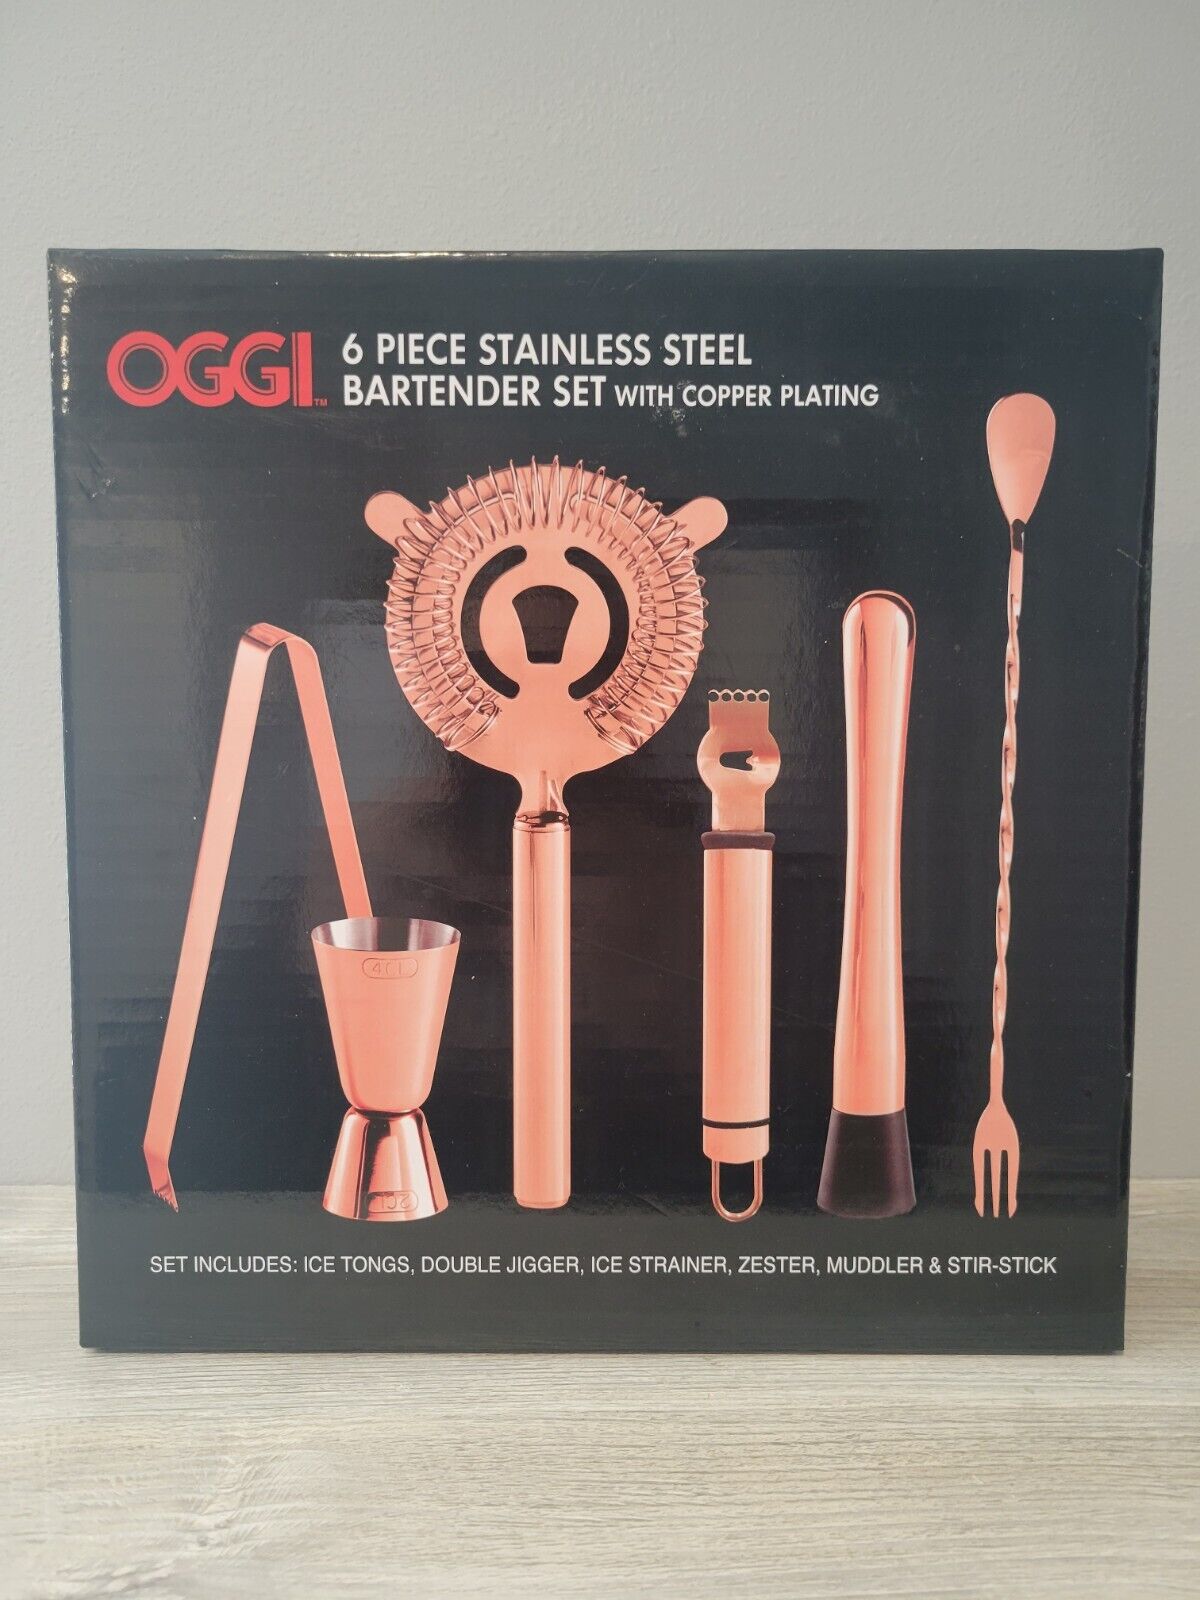 OGGI 6 PC Stainless Steel Bartender Set with Copper Plating Used Missing Pieces 